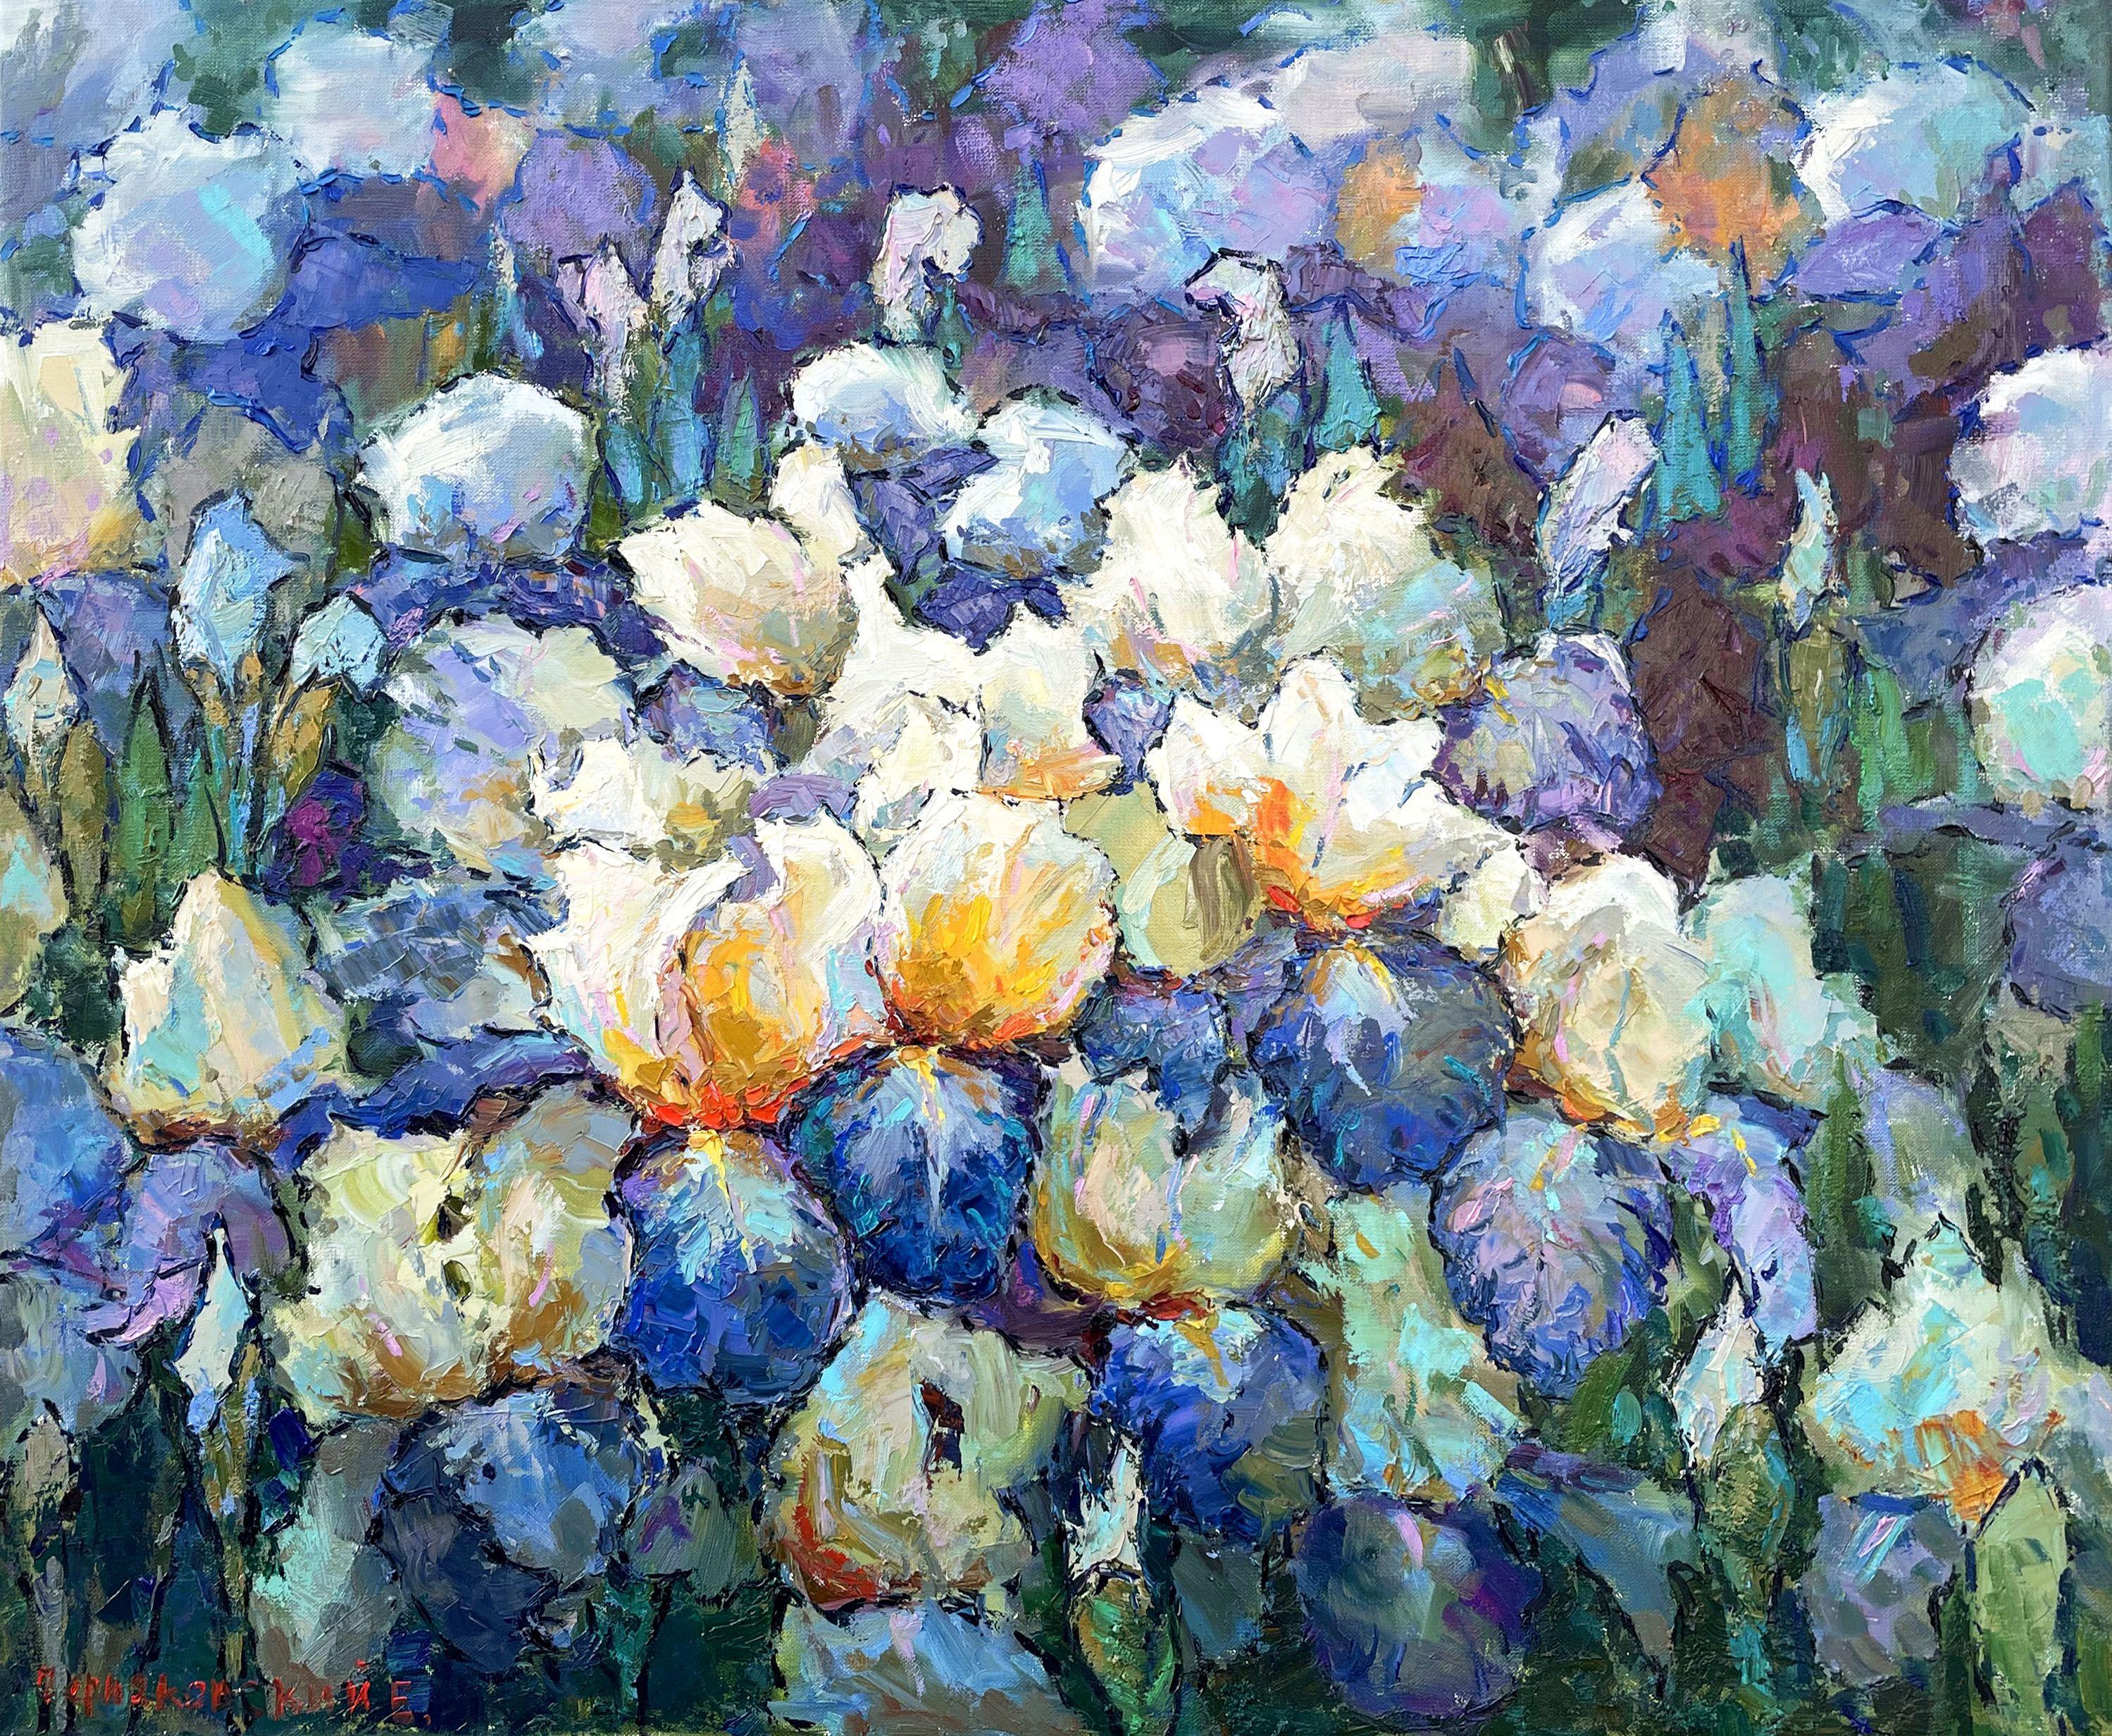 Original Oil painting by Ukrainian artist Evgeny Chernyakovsky "Irises" 75.0 X 90.0 CM / 29.5 X 35.4 IN HIGH QUALITY oil on canvas Signed on the front and back Dated 2022 Good condition GUARANTEE OF AUTHENTICITY :: Painting :: Impressionist :: This